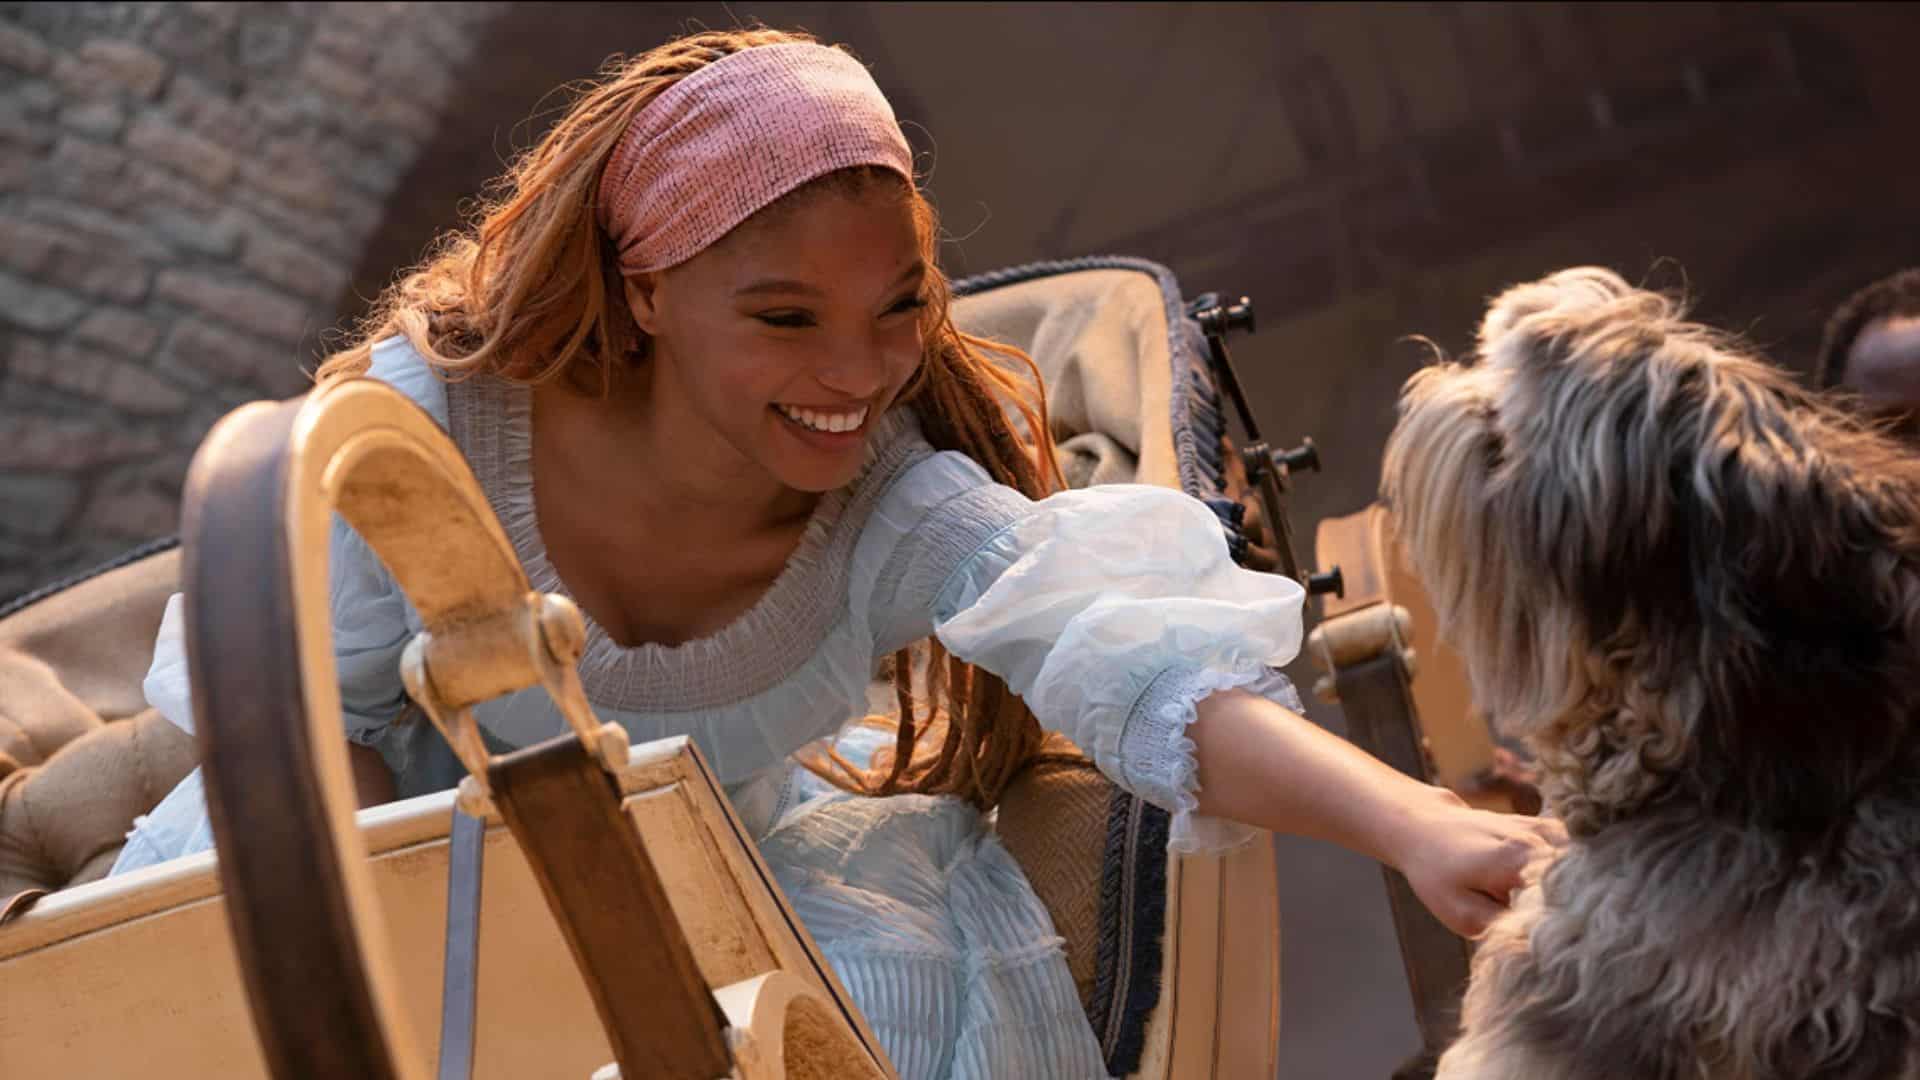 Halle Bailey sitting in a carriage and petting a dog in this image from Walt Disney Pictures.